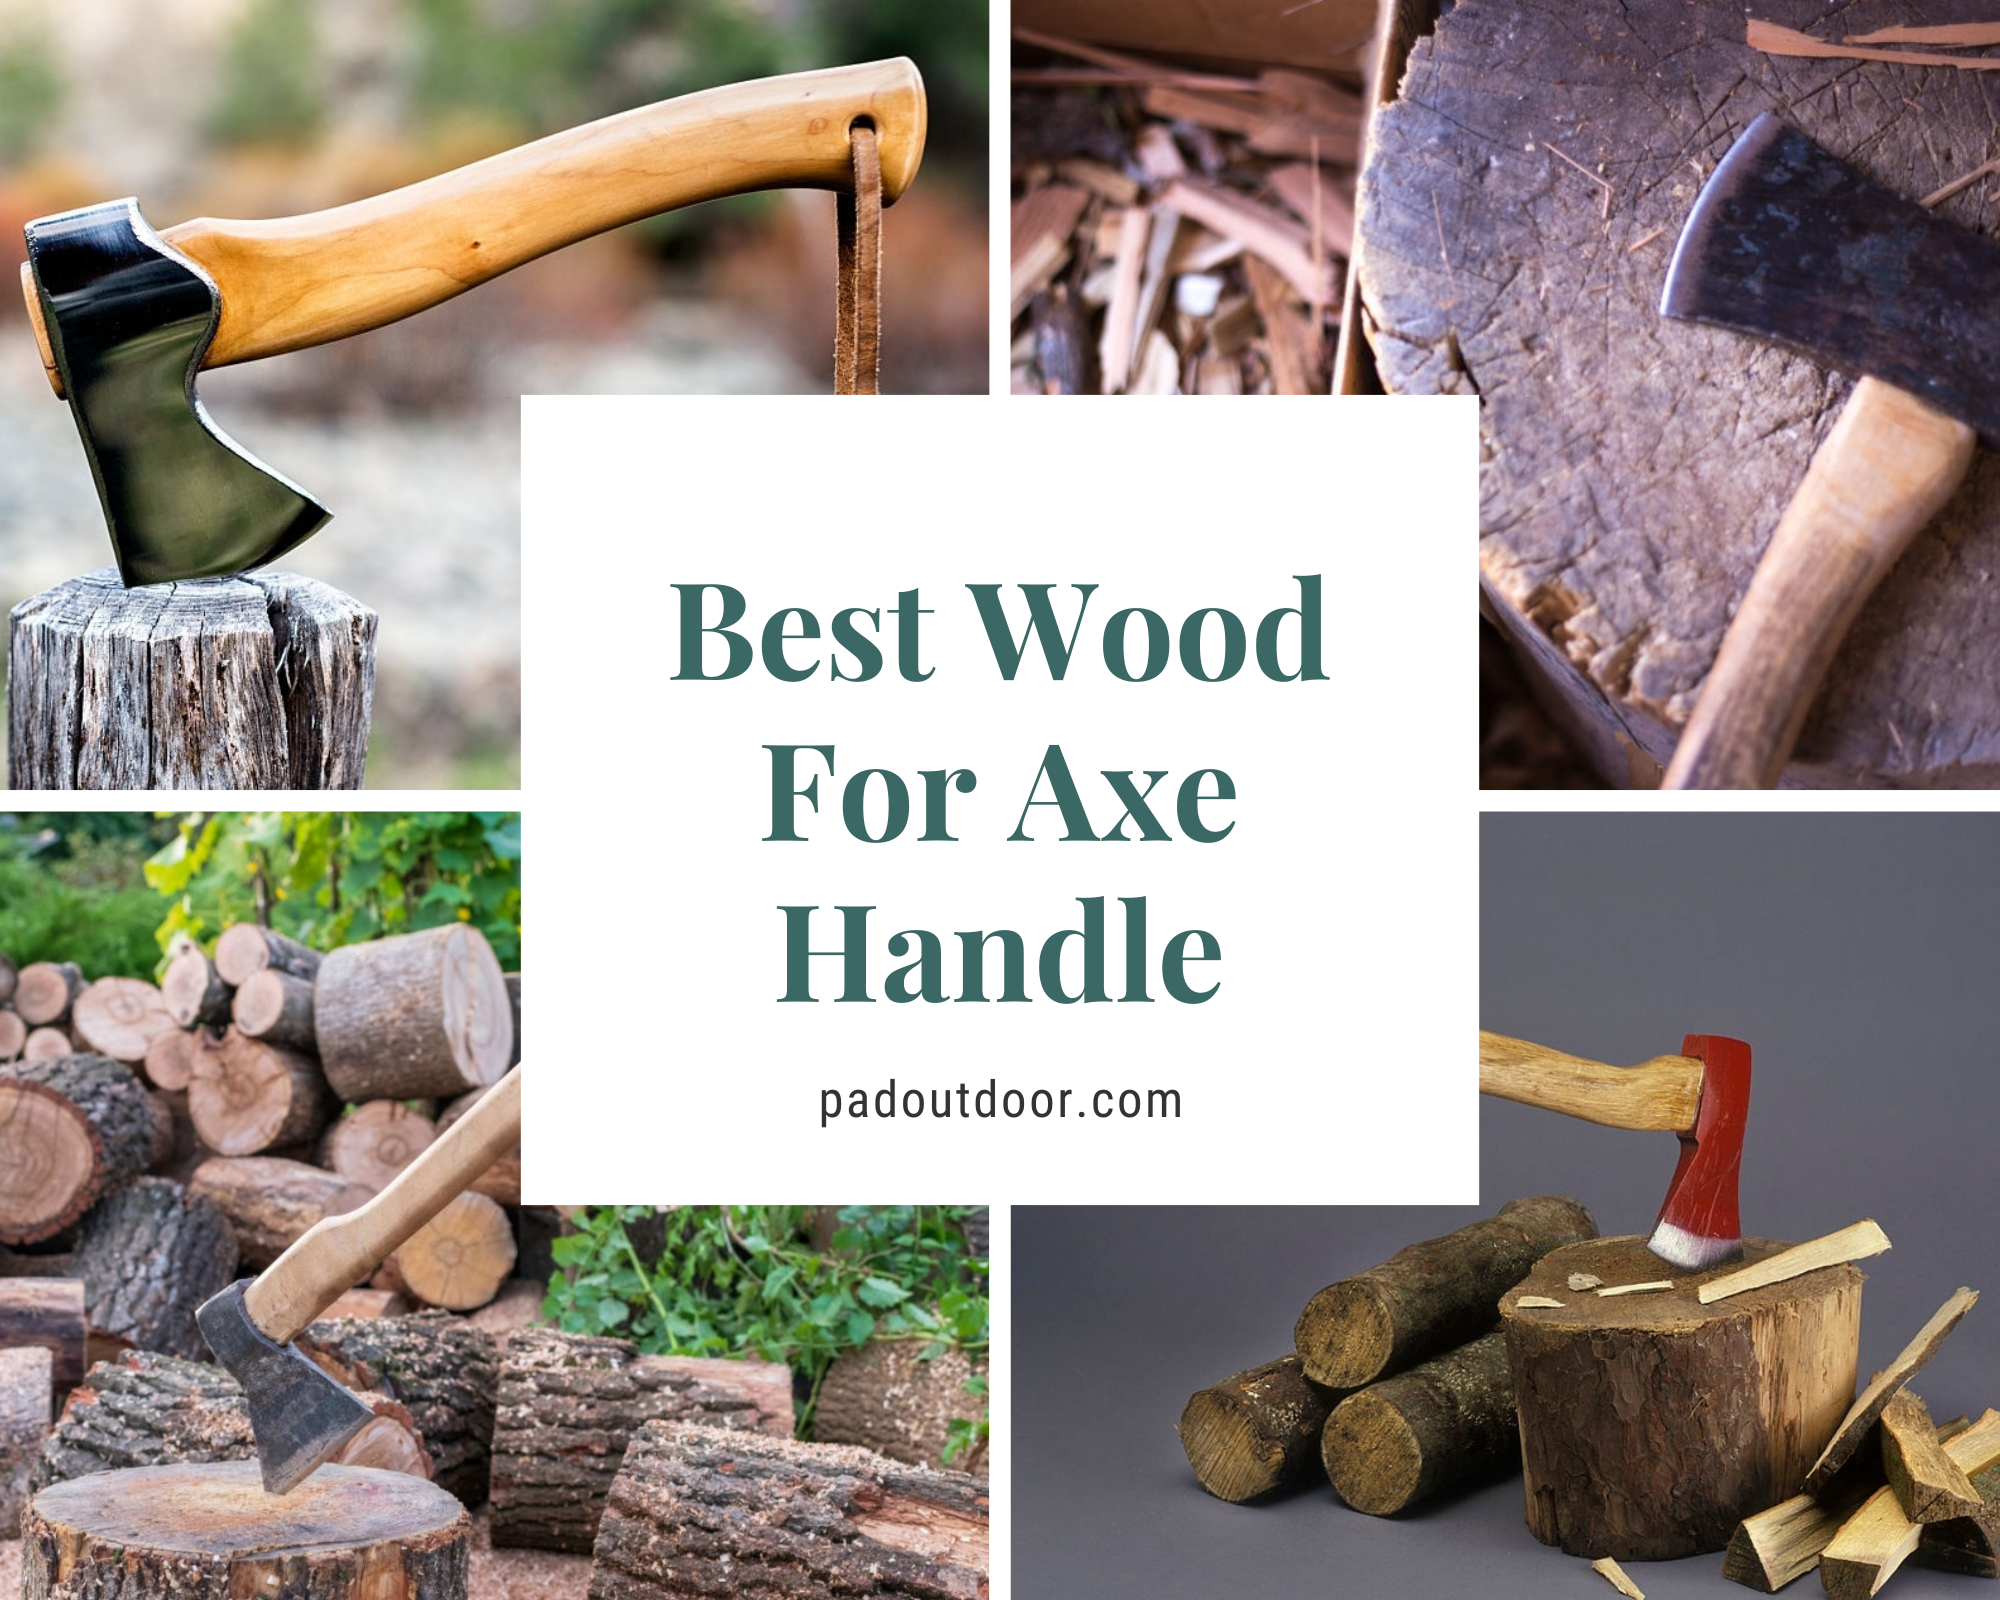 The Best Wood For Axe Handle (2022 Reviews)